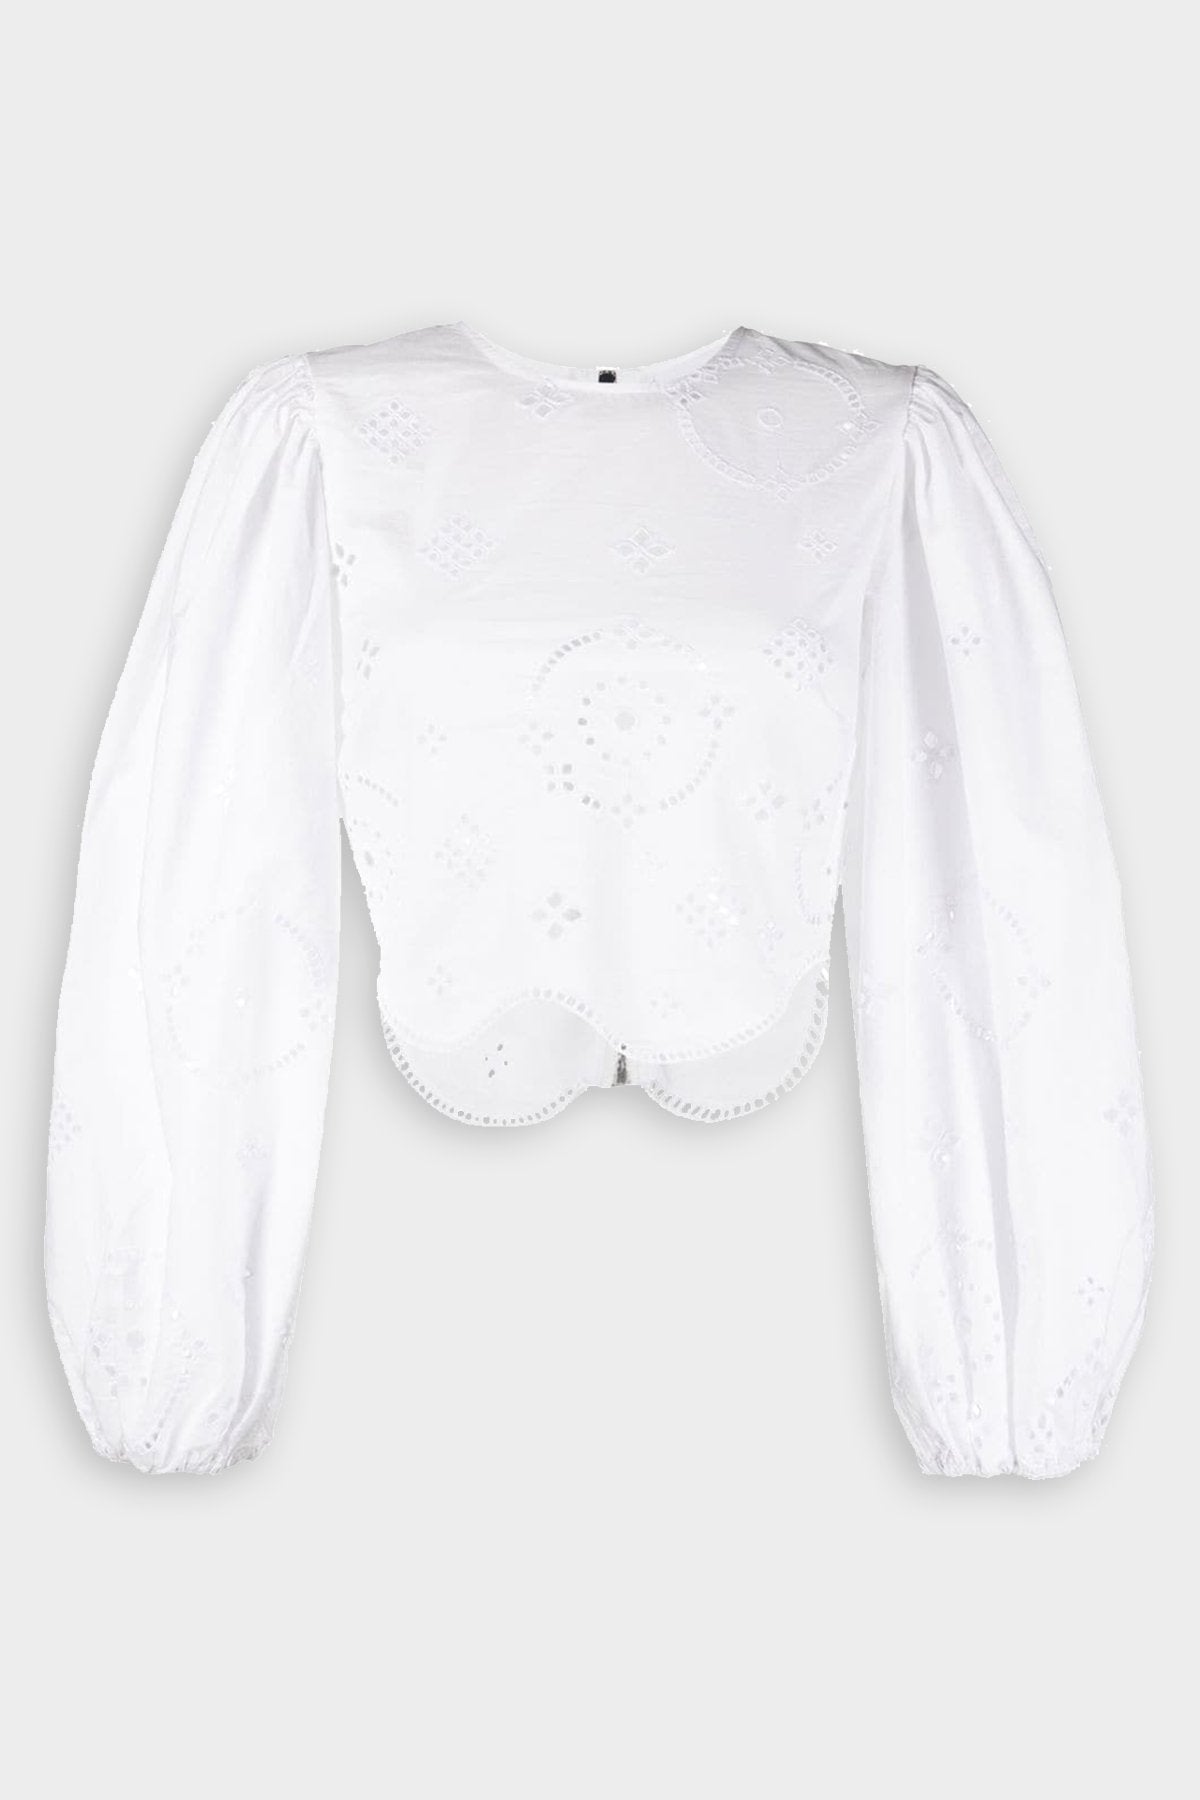 Broderie Anglaise Cropped Blouse in Bright White - shop-olivia.com